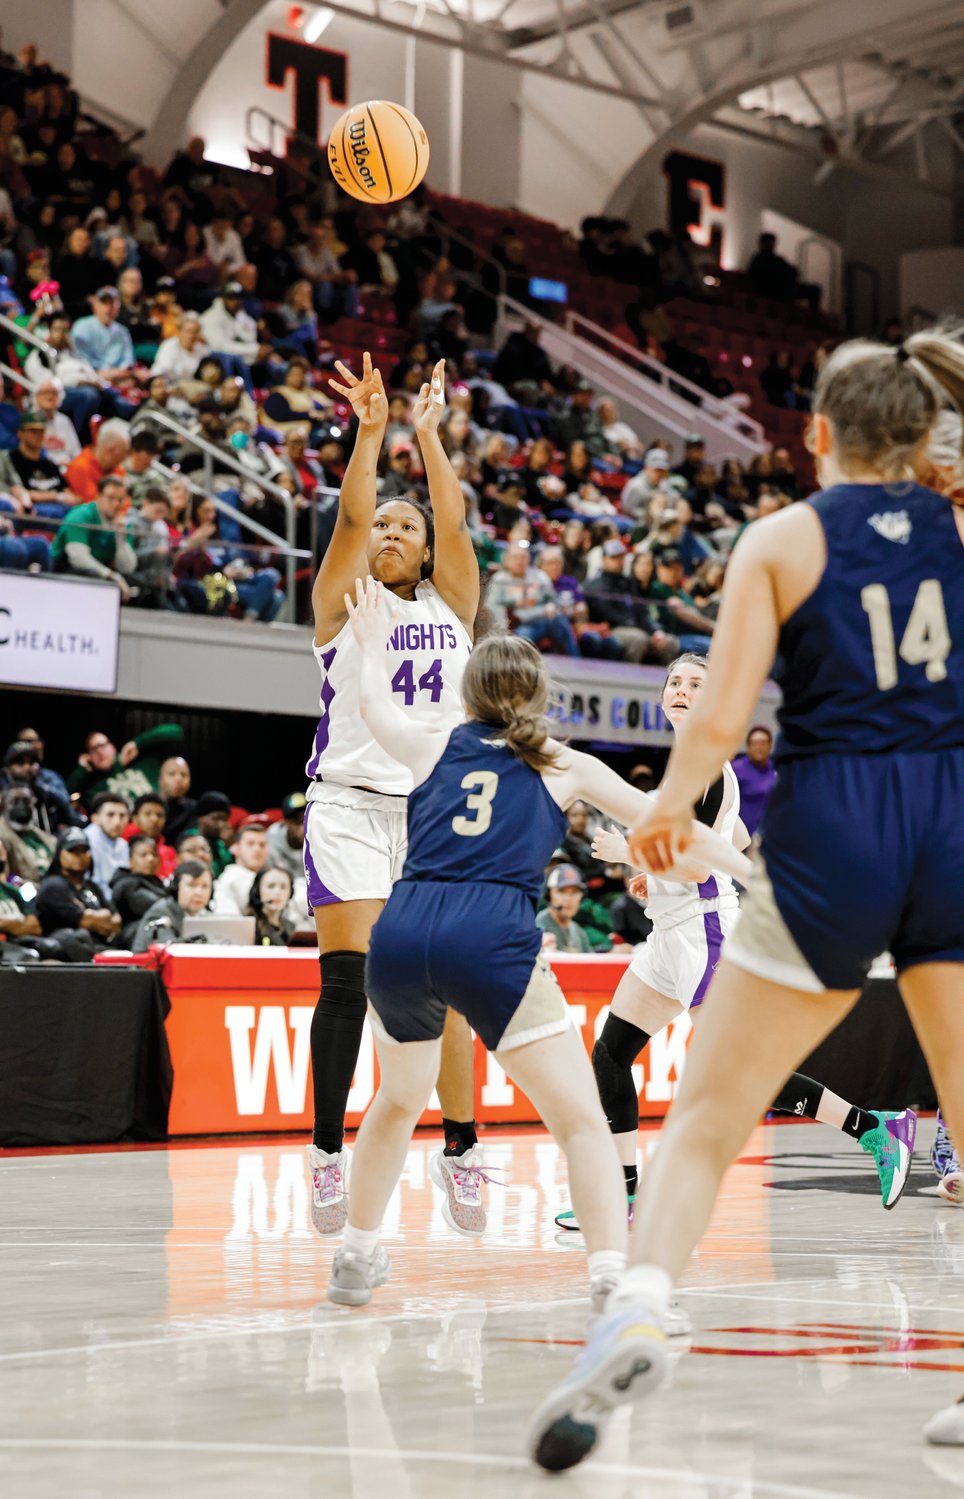 Chatham Charter junior Meah Brooks (44) scored a team-high 17 points in the Knights' 73-43 loss to Bishop McGuinness in the 1A girls state final Saturday.